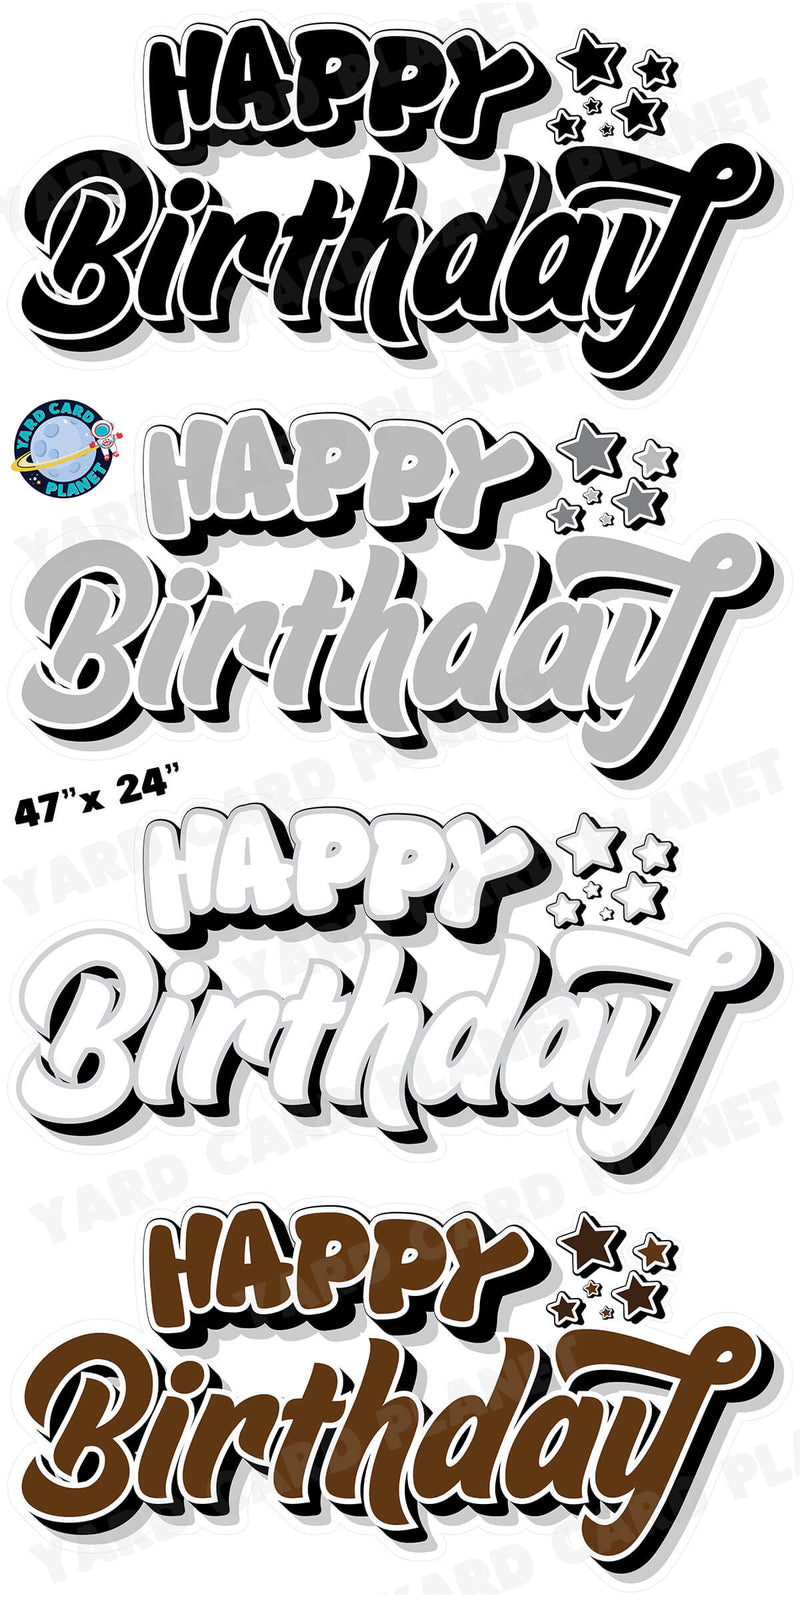 Happy Birthday EZ Quick Signs in Solid Black, White, Grey and Brown Yard Card Set with Measurements